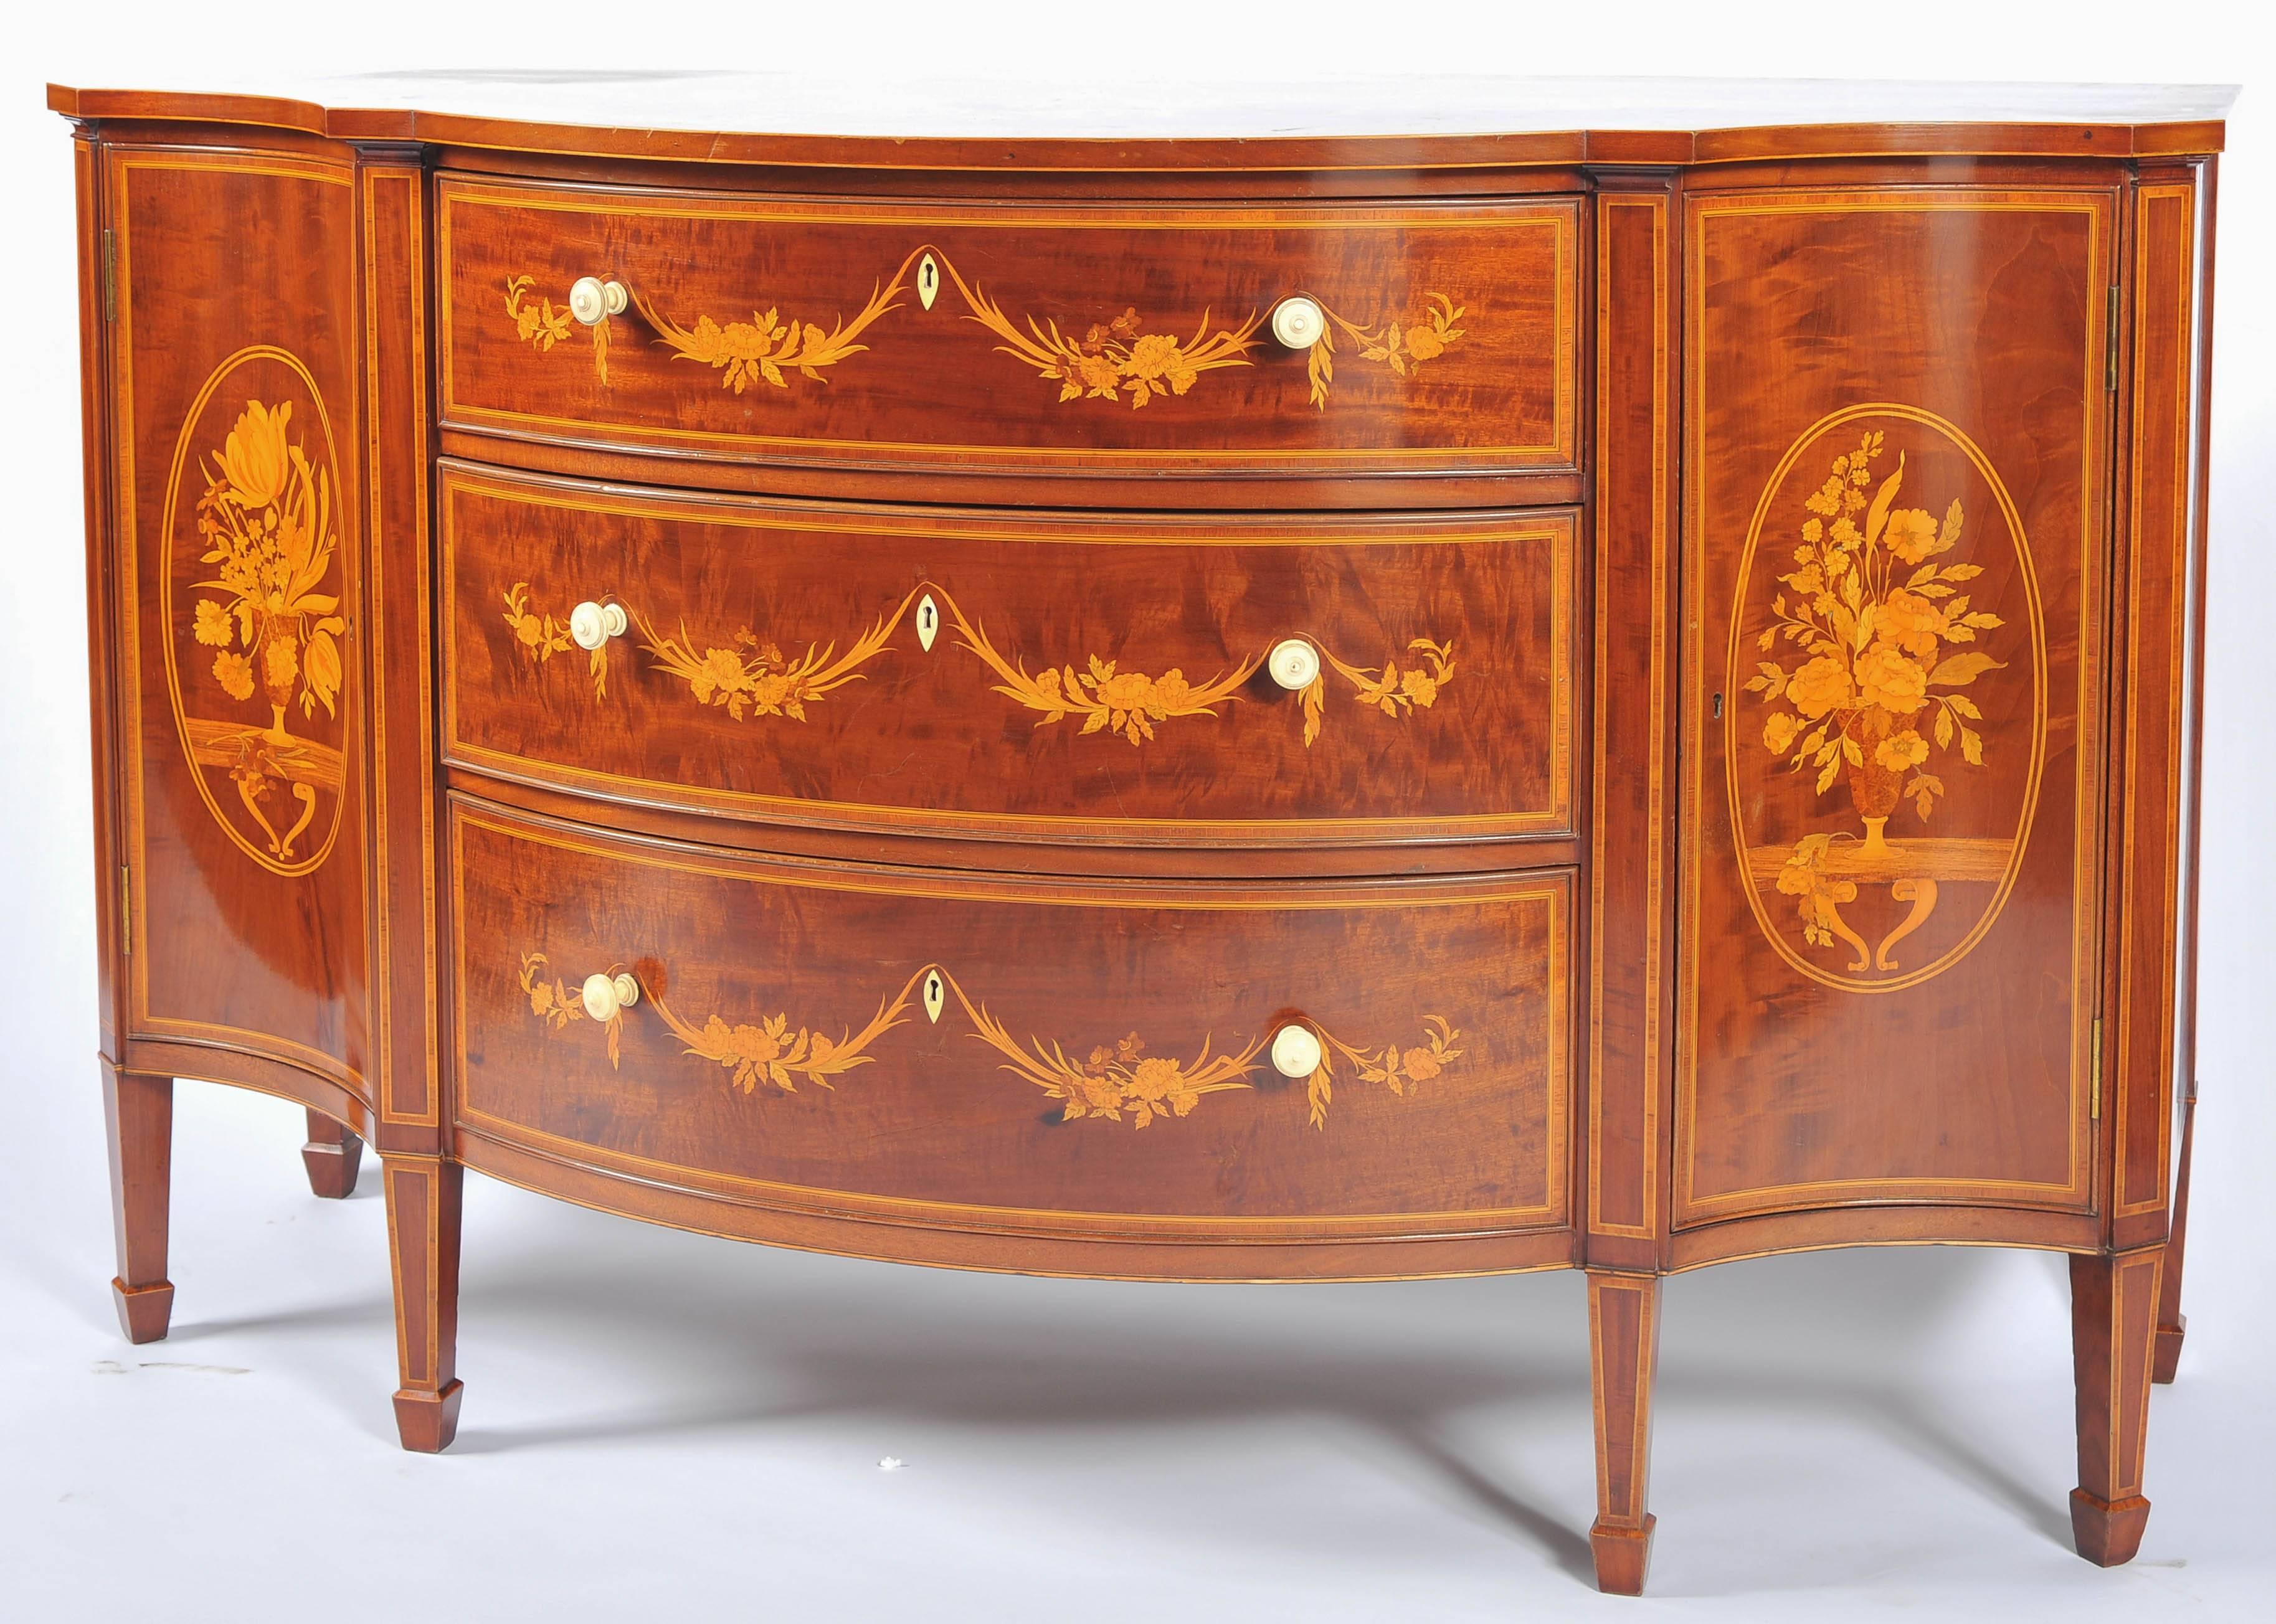 A very good quality Edwardian mahogany marquetry inlaid serpentine fronted side cabinet. Satinwood and boxwood inlaid marquetry panels, three graduating drawers to the centre, cupboard doors to either side and raised on square tapering legs with